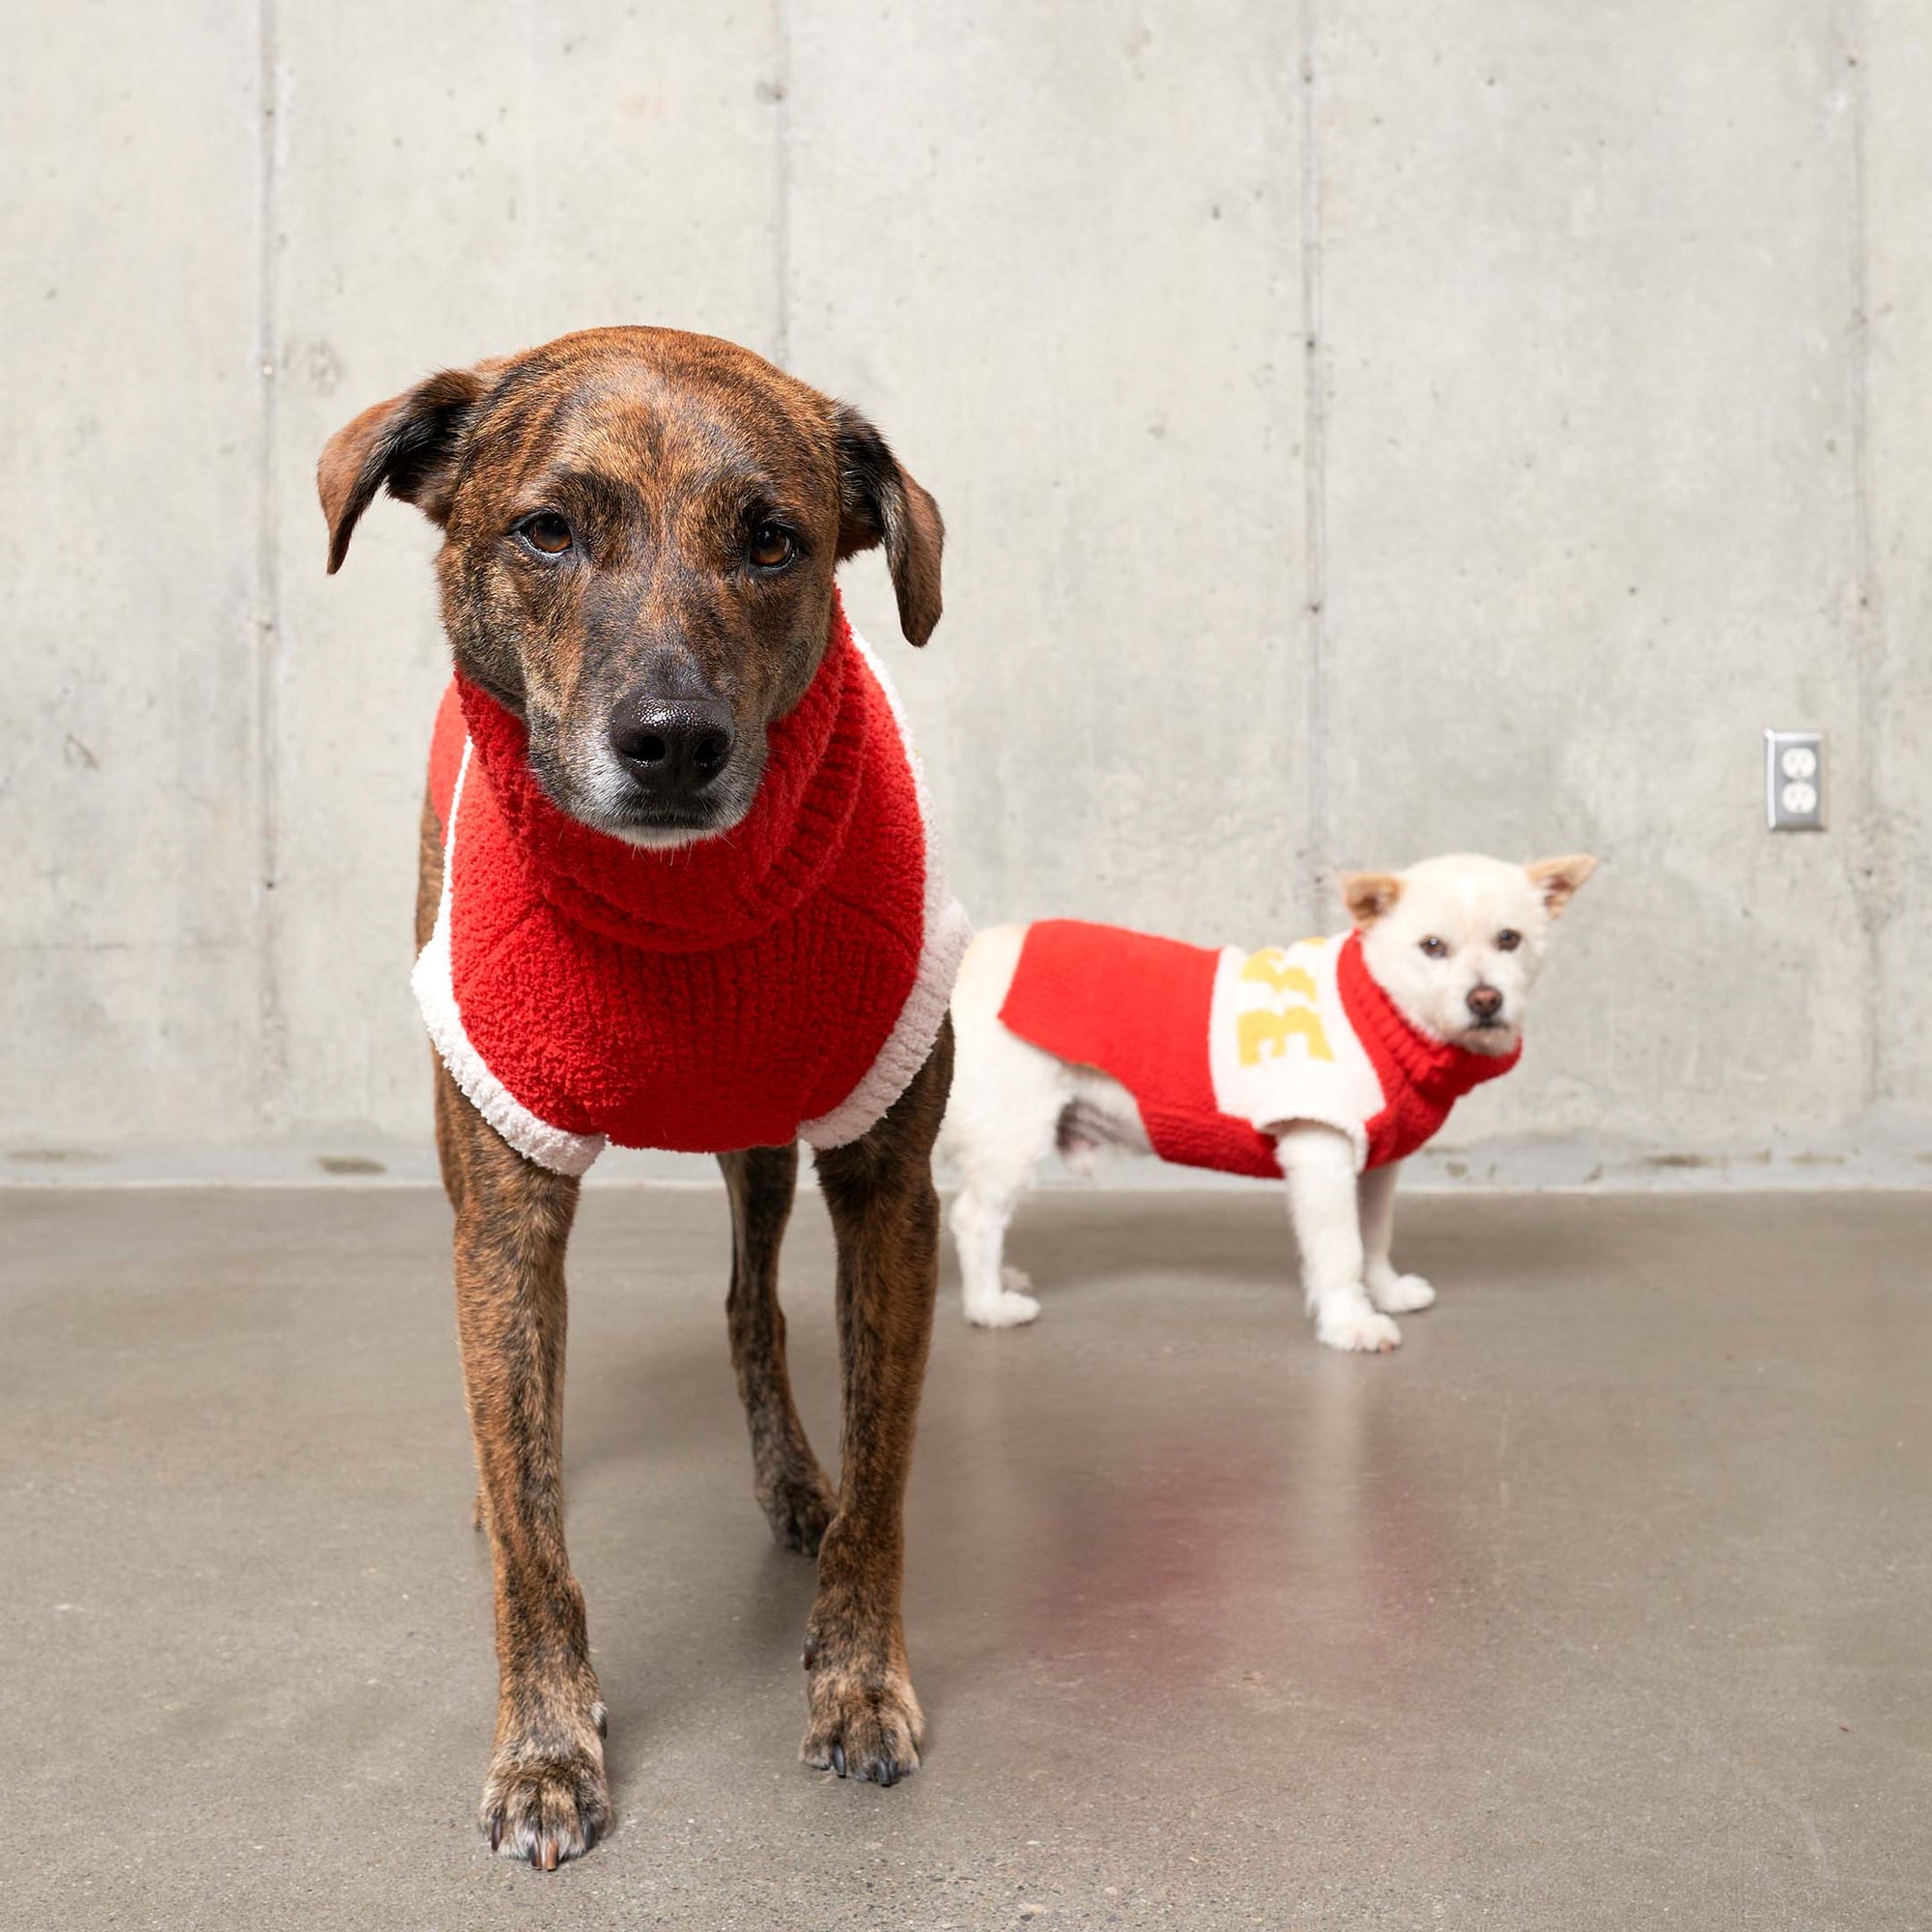  A large brindle dog in a vivid red turtleneck sweater stands in front, with a small white companion dog sporting a matching red sweater with a unique emblem, capturing a moment of canine fashion.